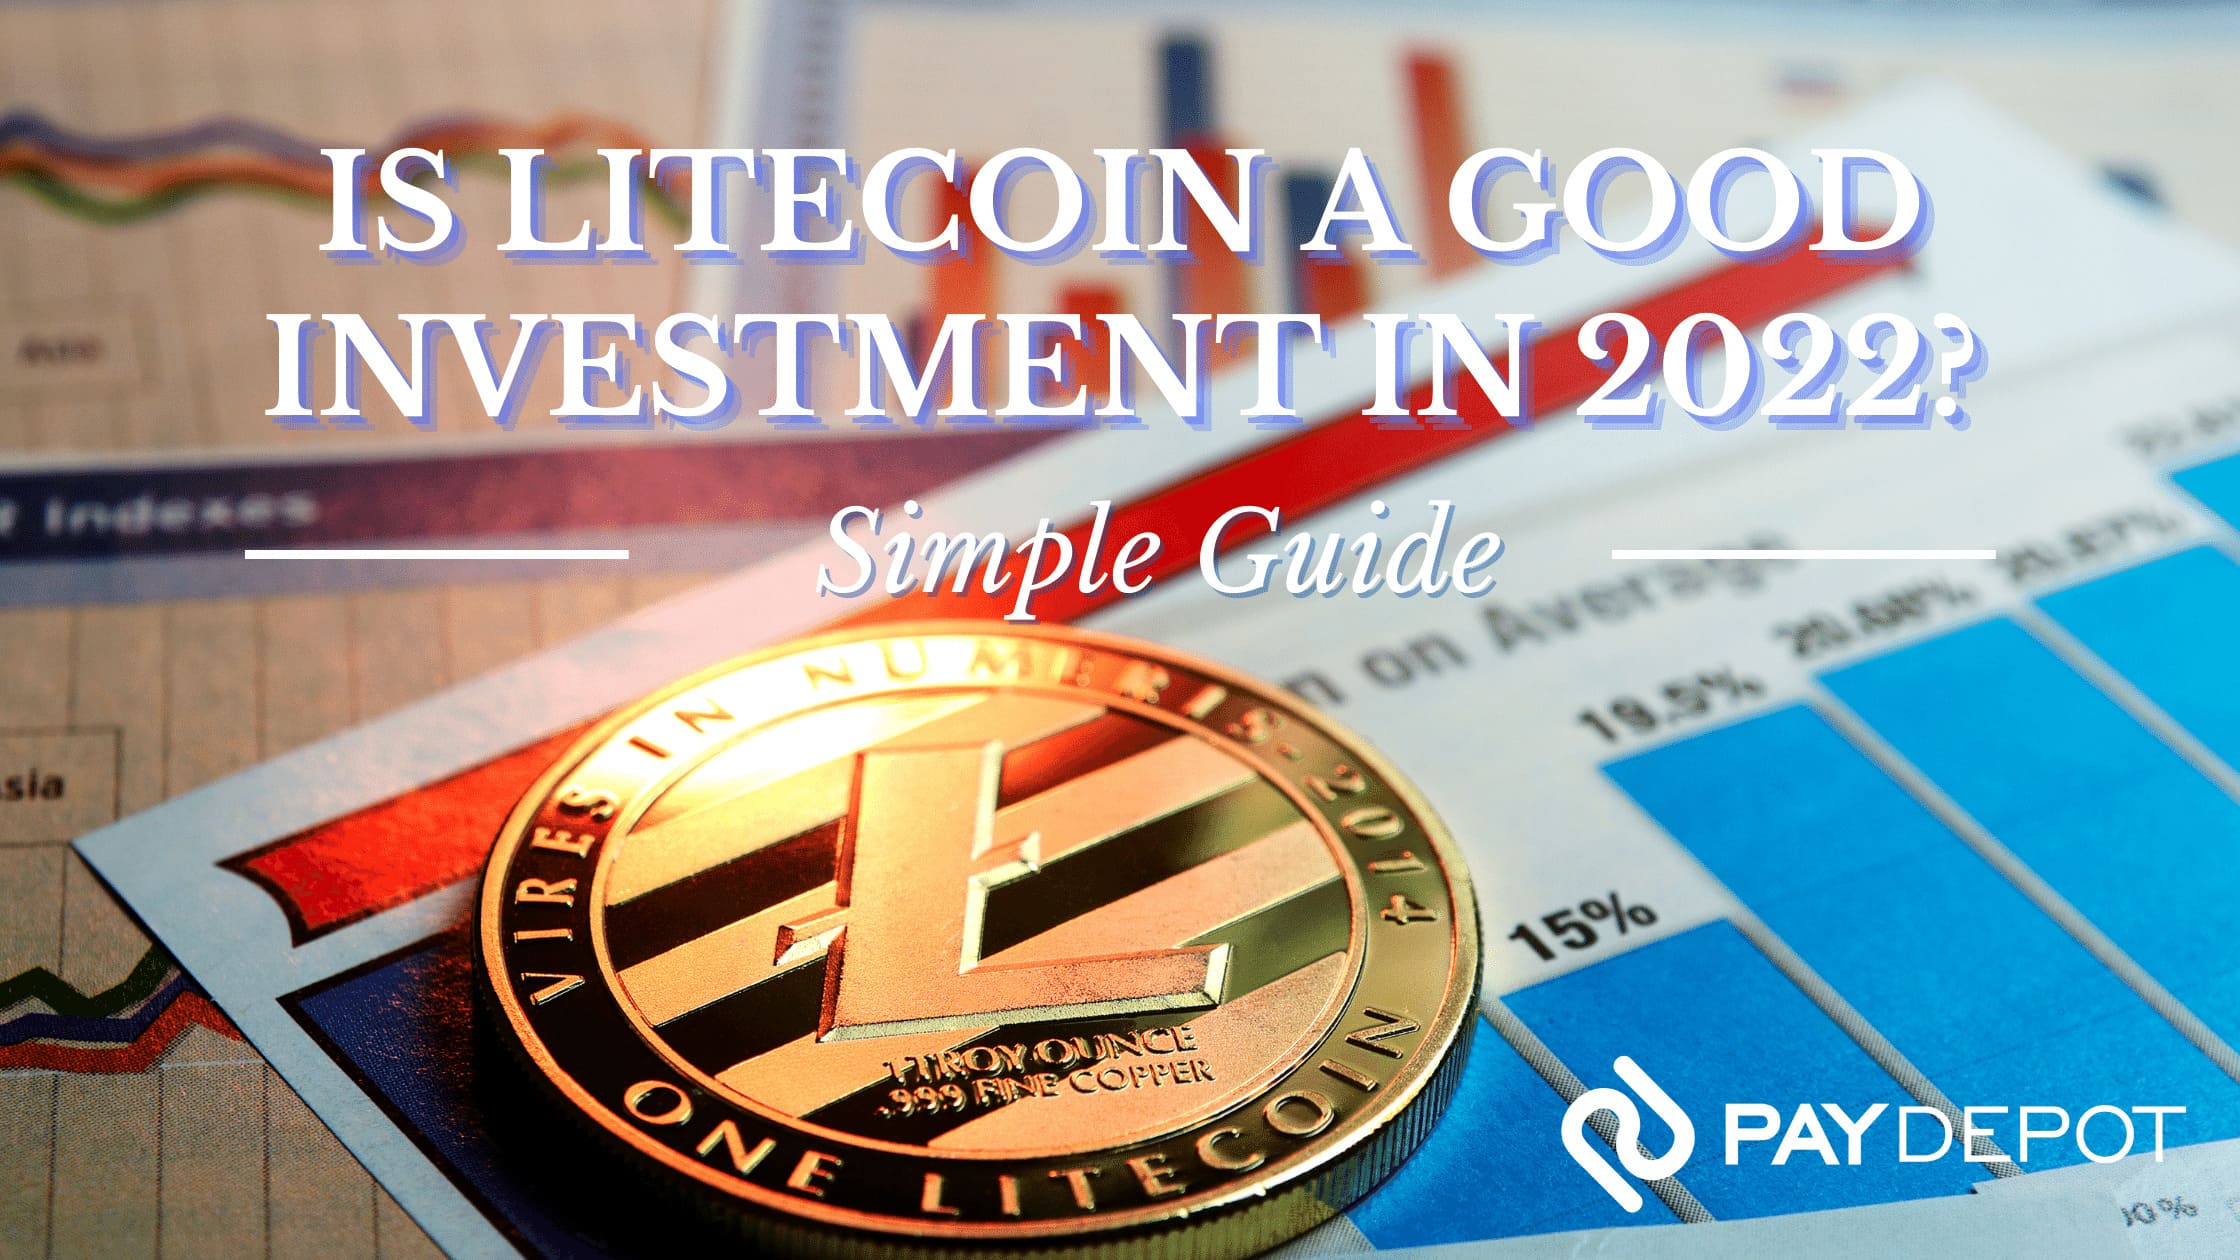 Is litecoin a good investment in 2022?